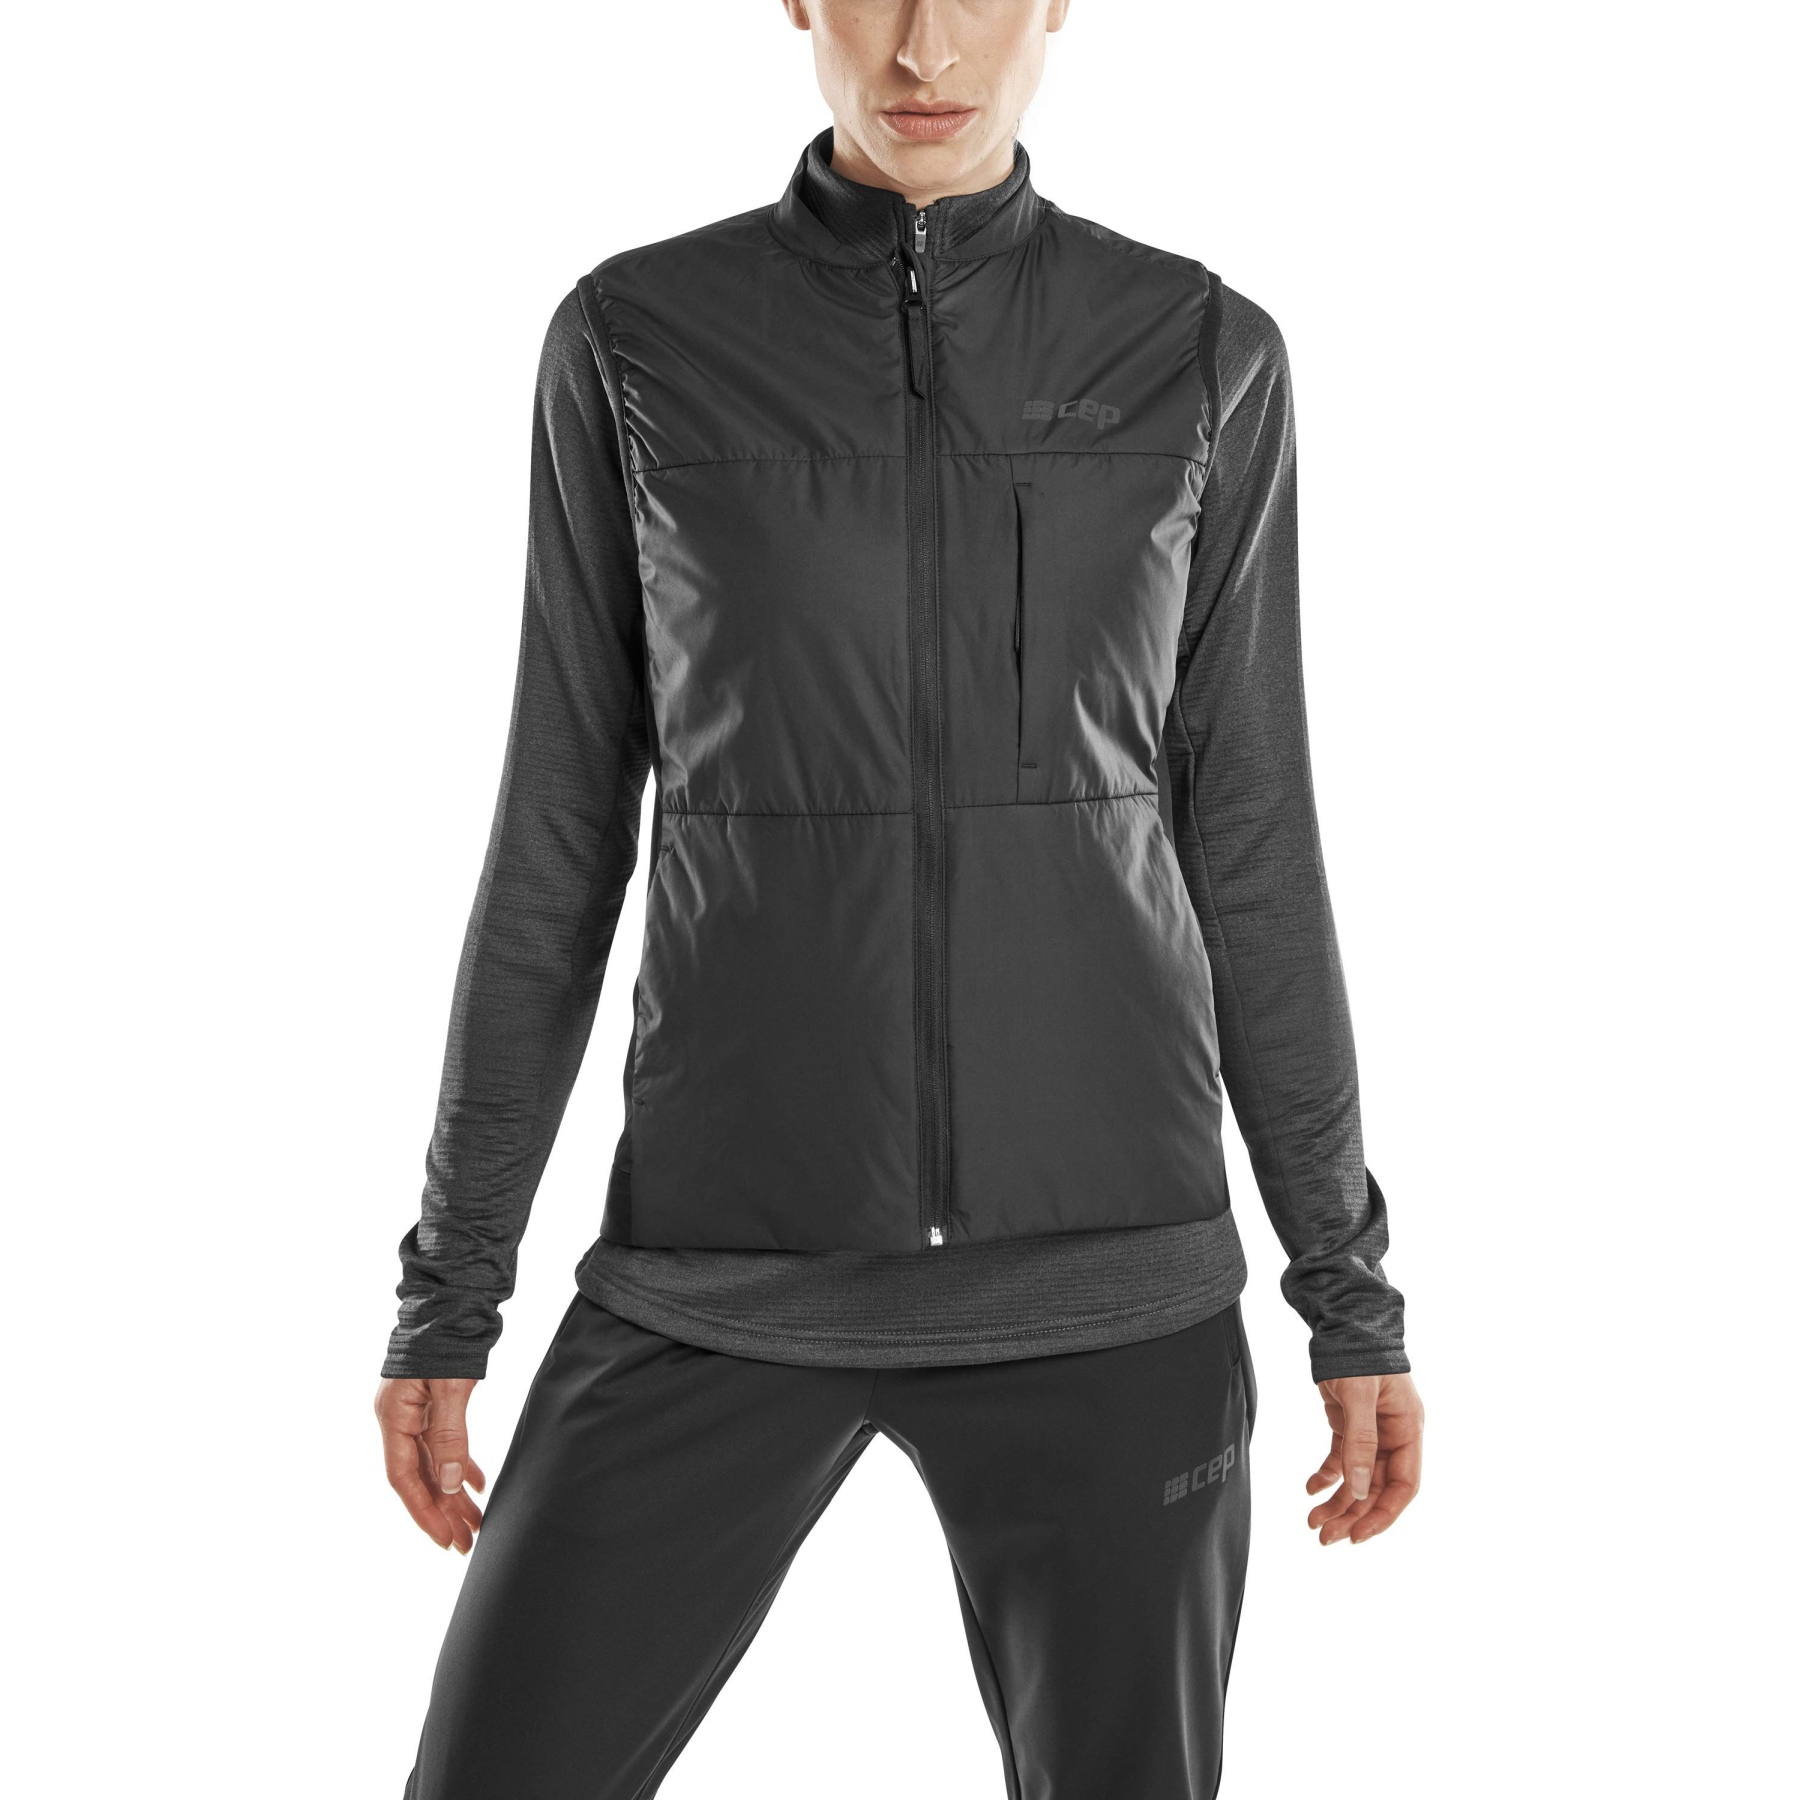 On Weather Vest - Chaleco de running Mujer